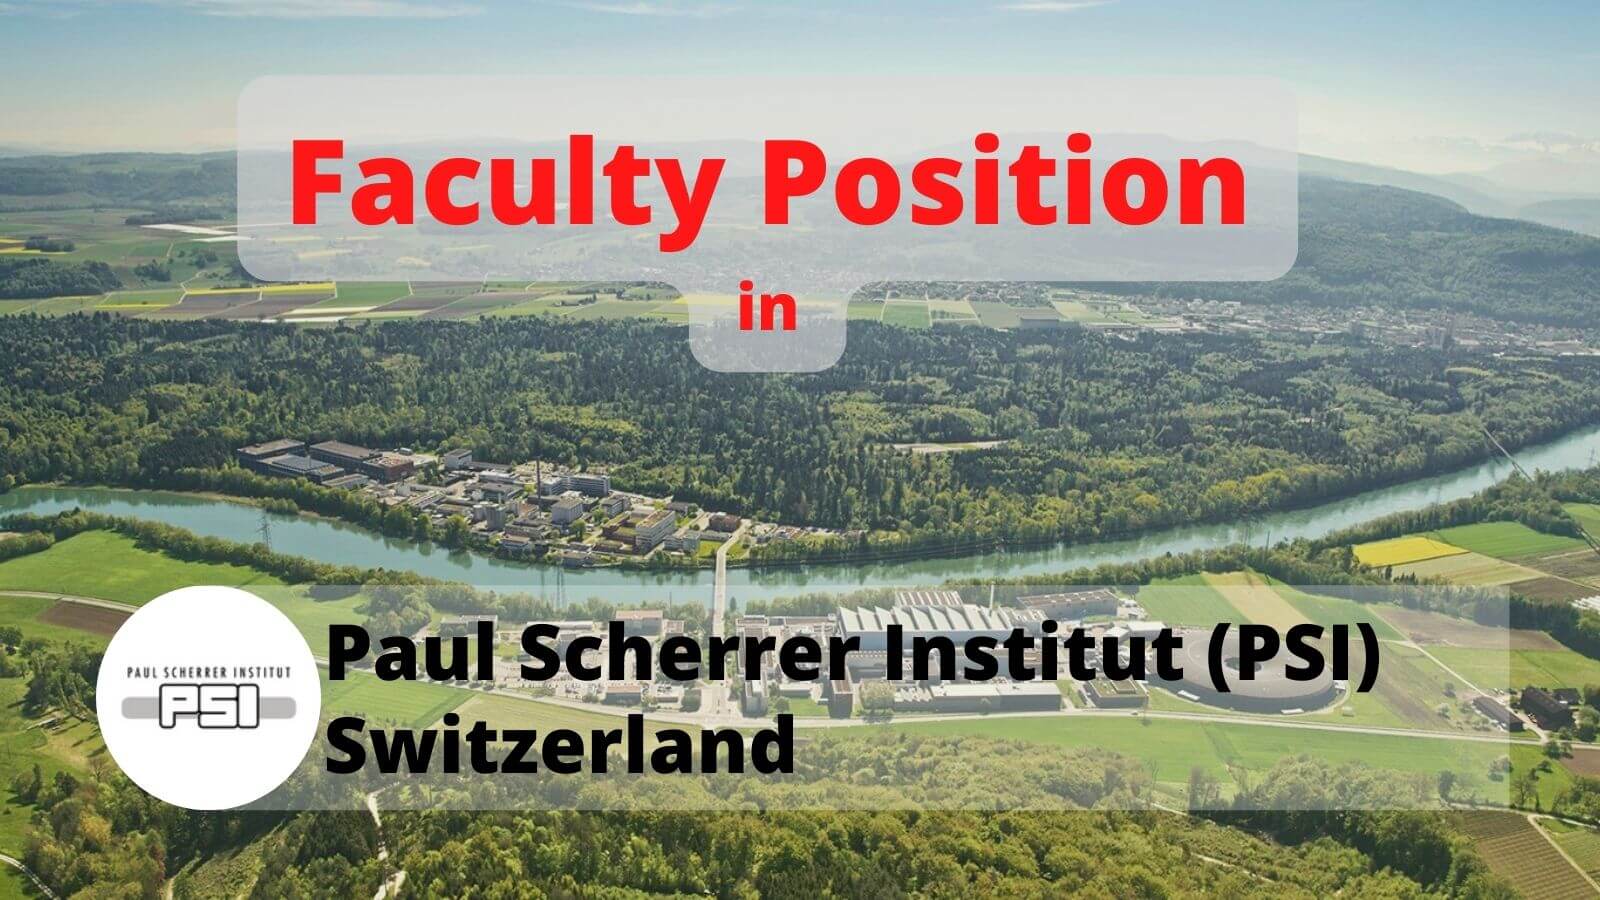 Faculty Position in PSI Switzerland